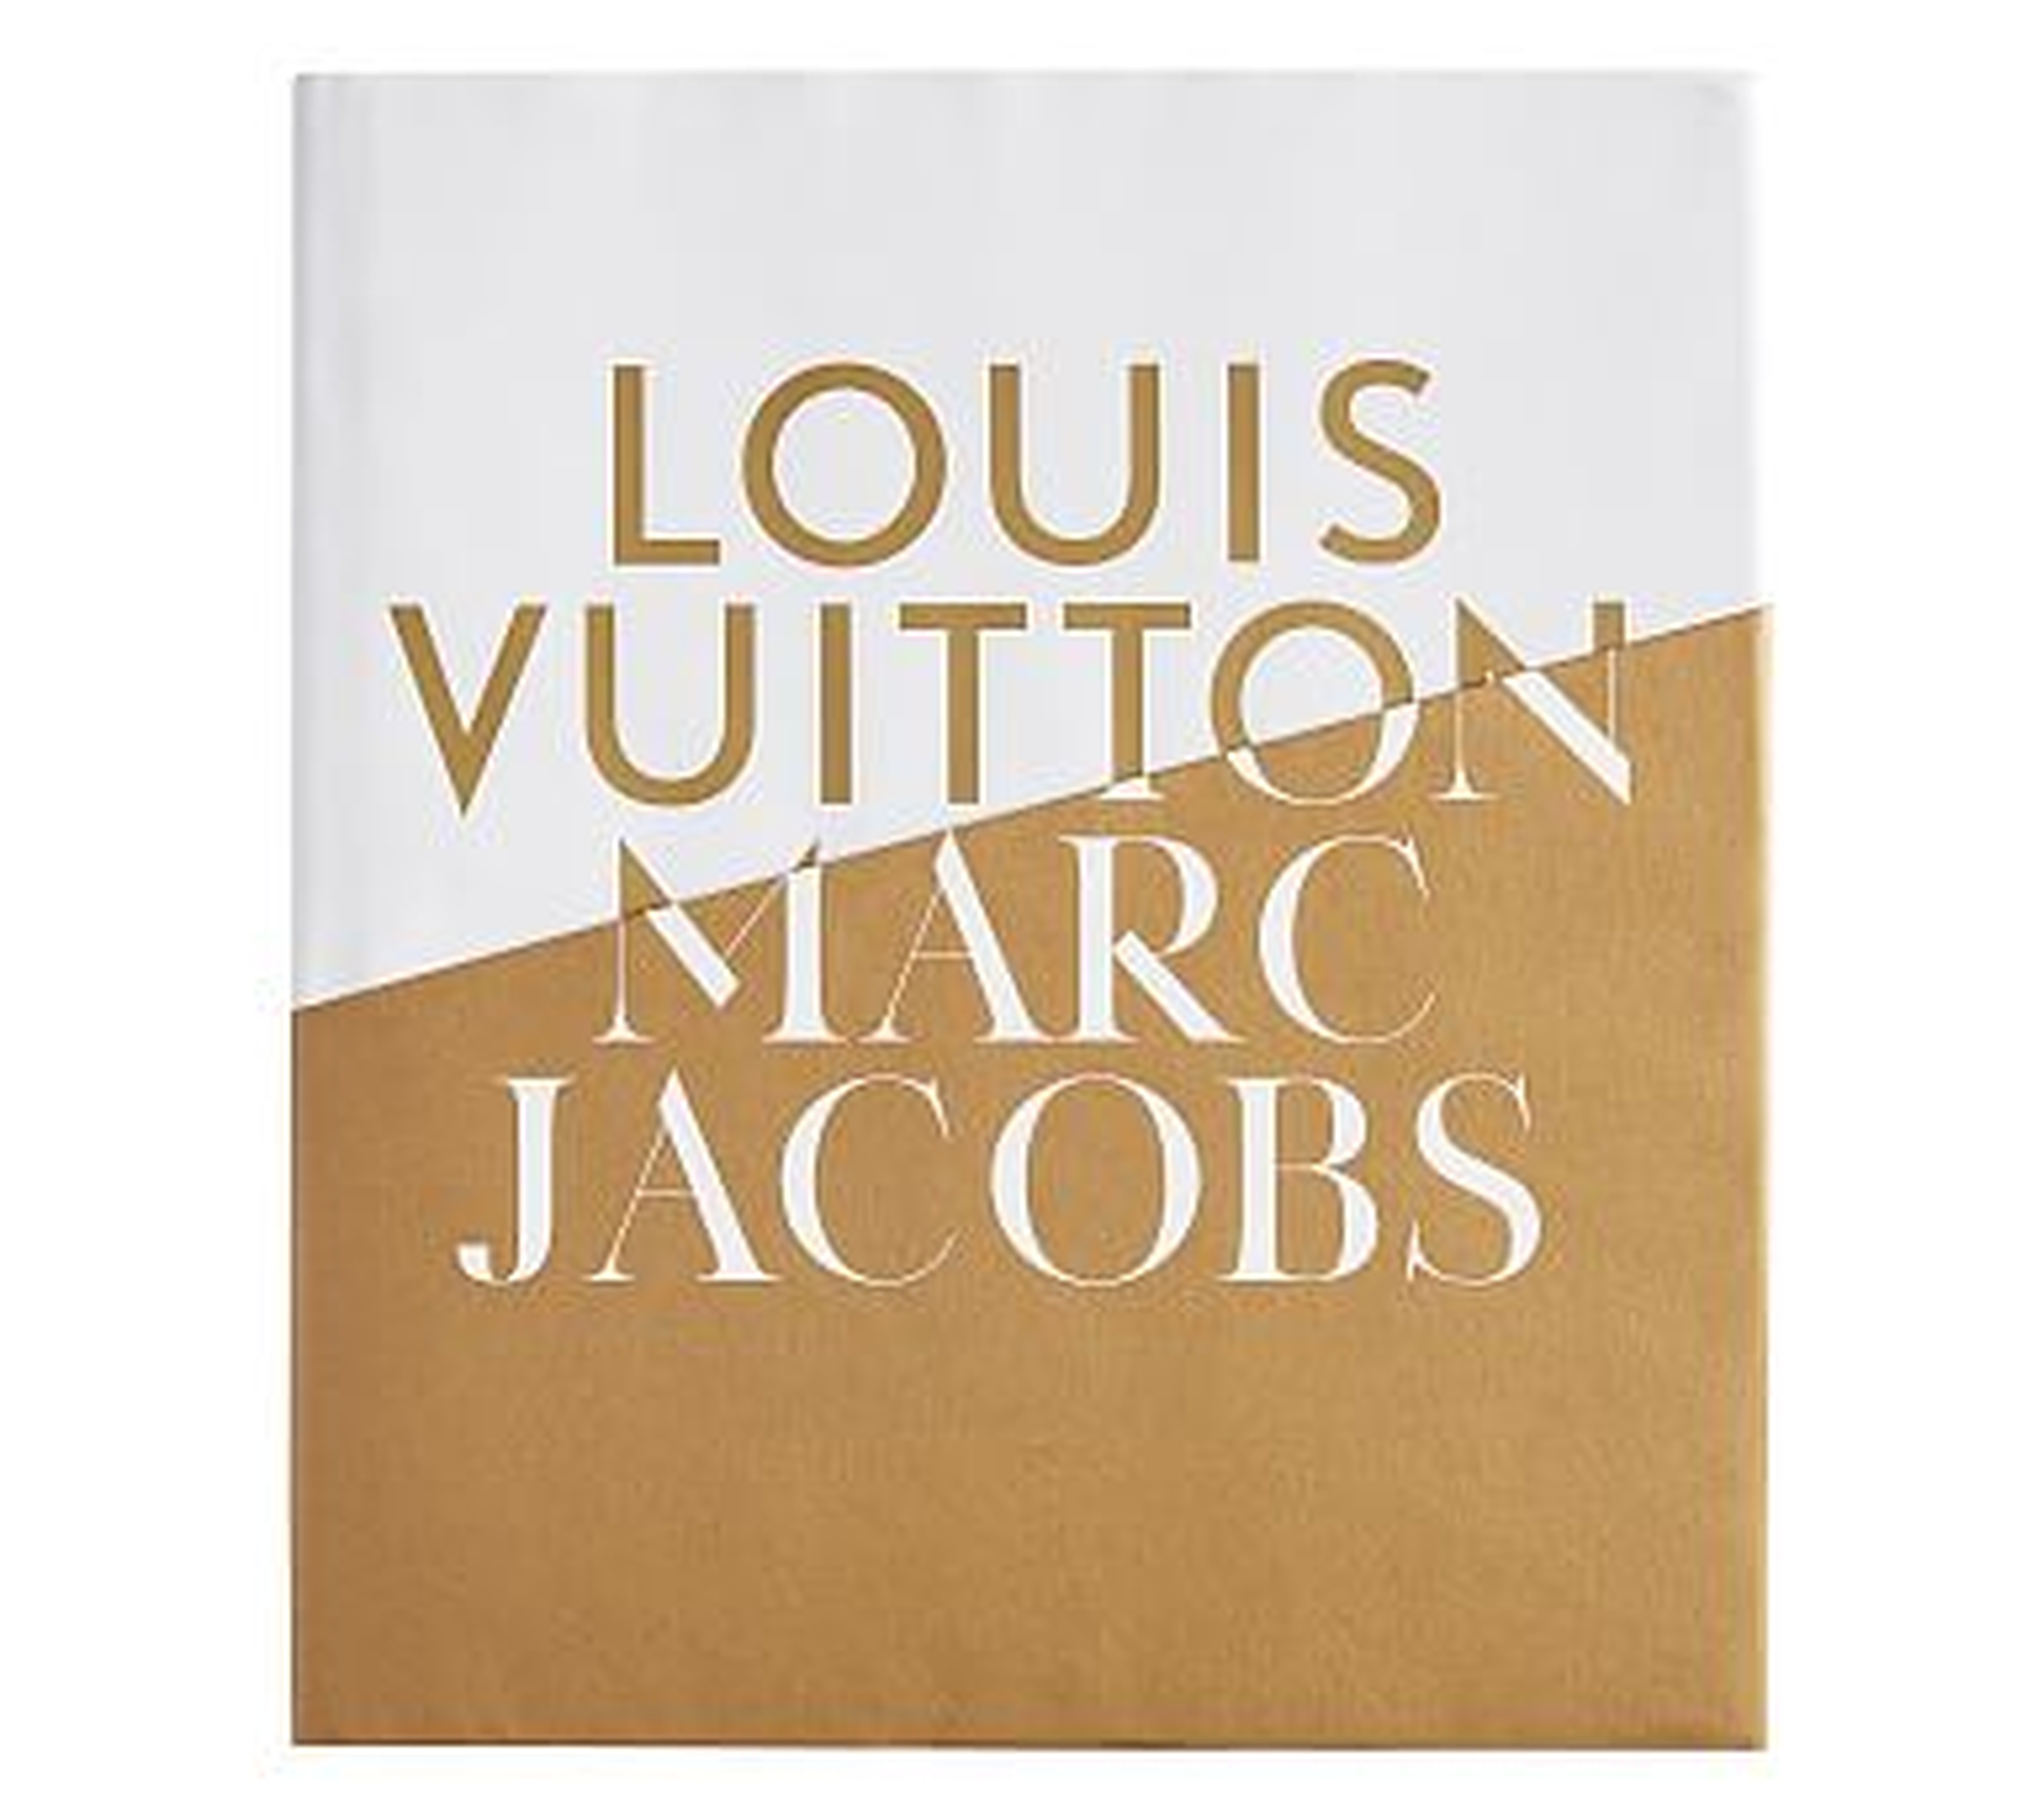 Louis Vuitton Marc Jacobs, Coffee Table Book - Pottery Barn